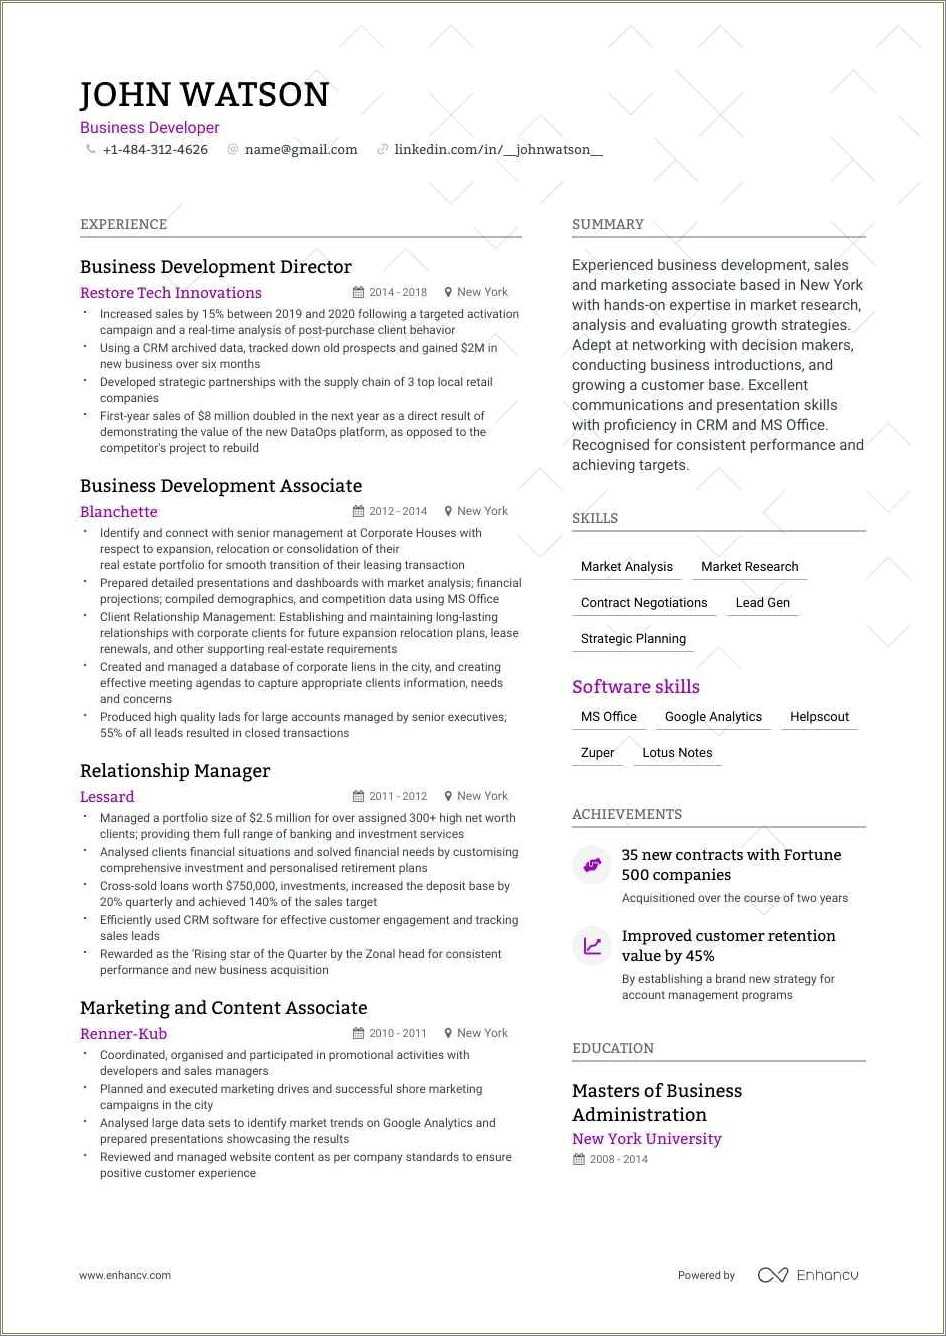 2+ Years Of Experience On Resume